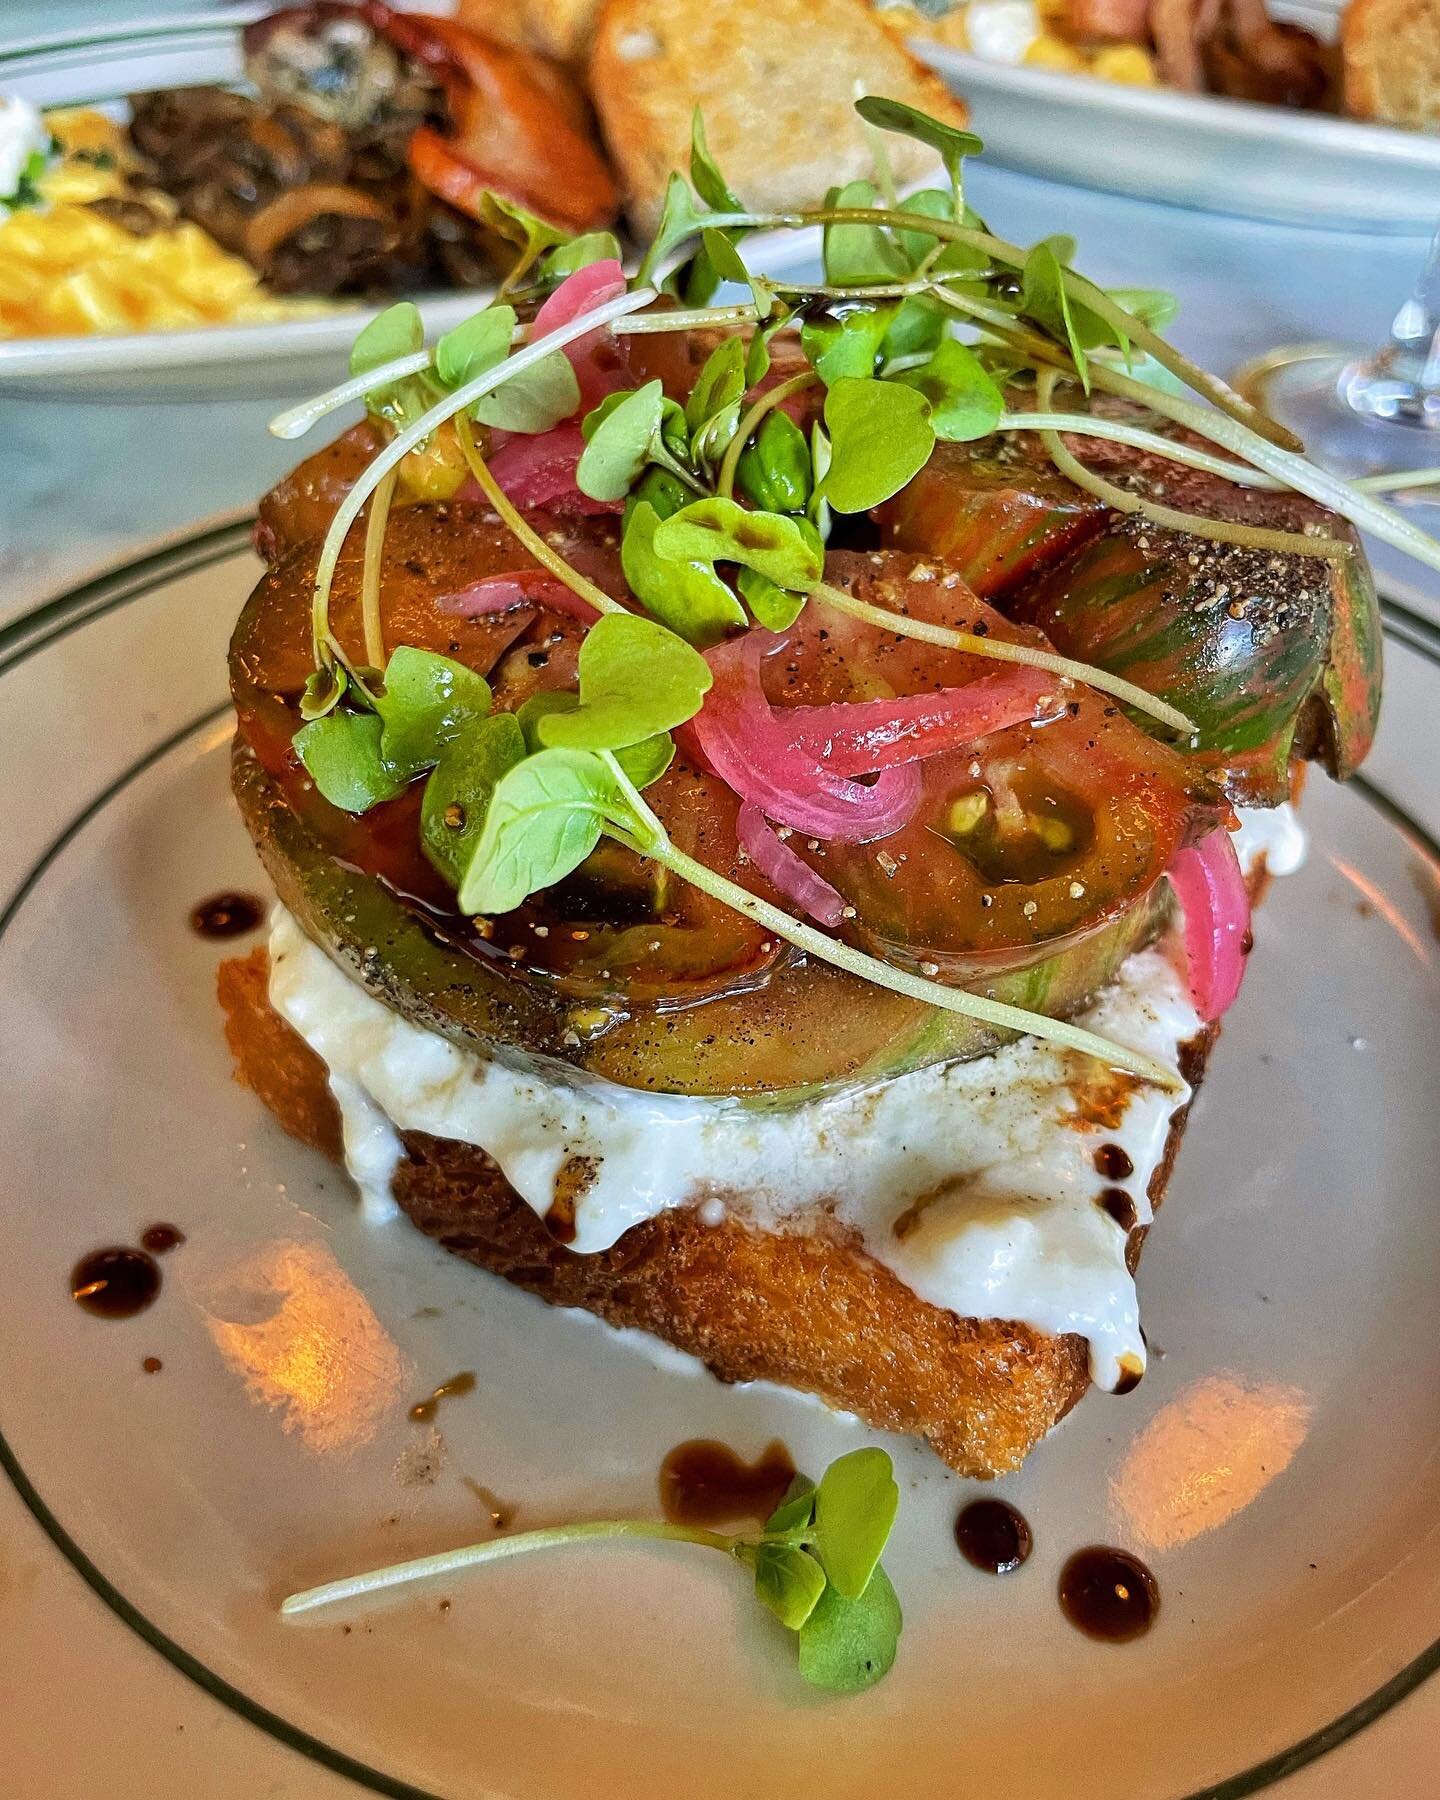 Summer 🍅 &gt;&gt;

|| Heirloom Tomato Toast || Stracciatella Cheese, Pickled Red Onion, Vin Cotto | #heirloomtomatoes #stracciatella #toast #brunch #toronto #thechewreview